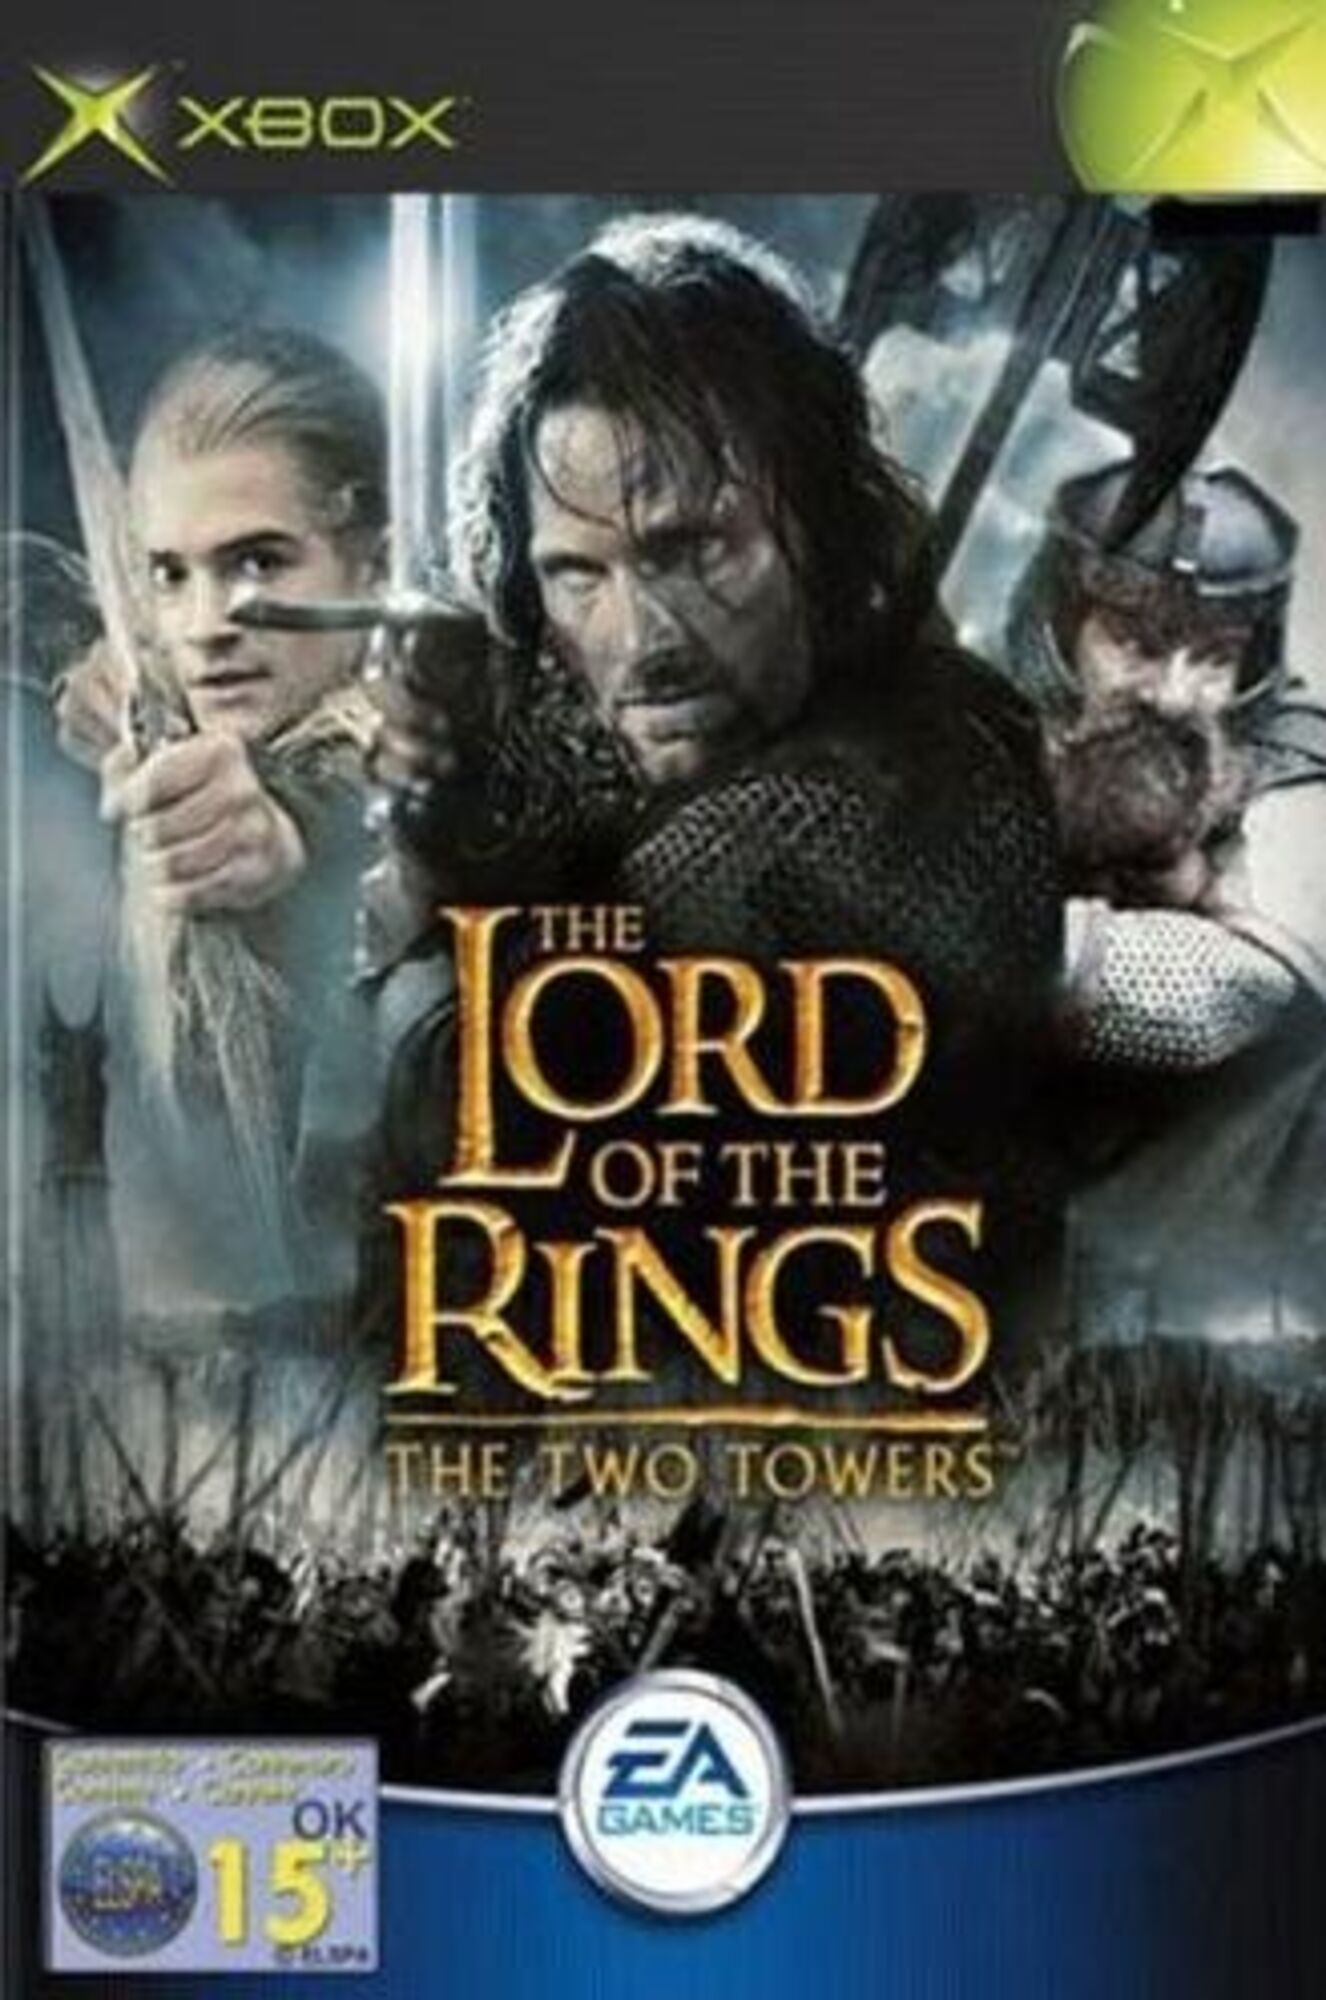 for iphone download The Lord of the Rings: The Two Towers free